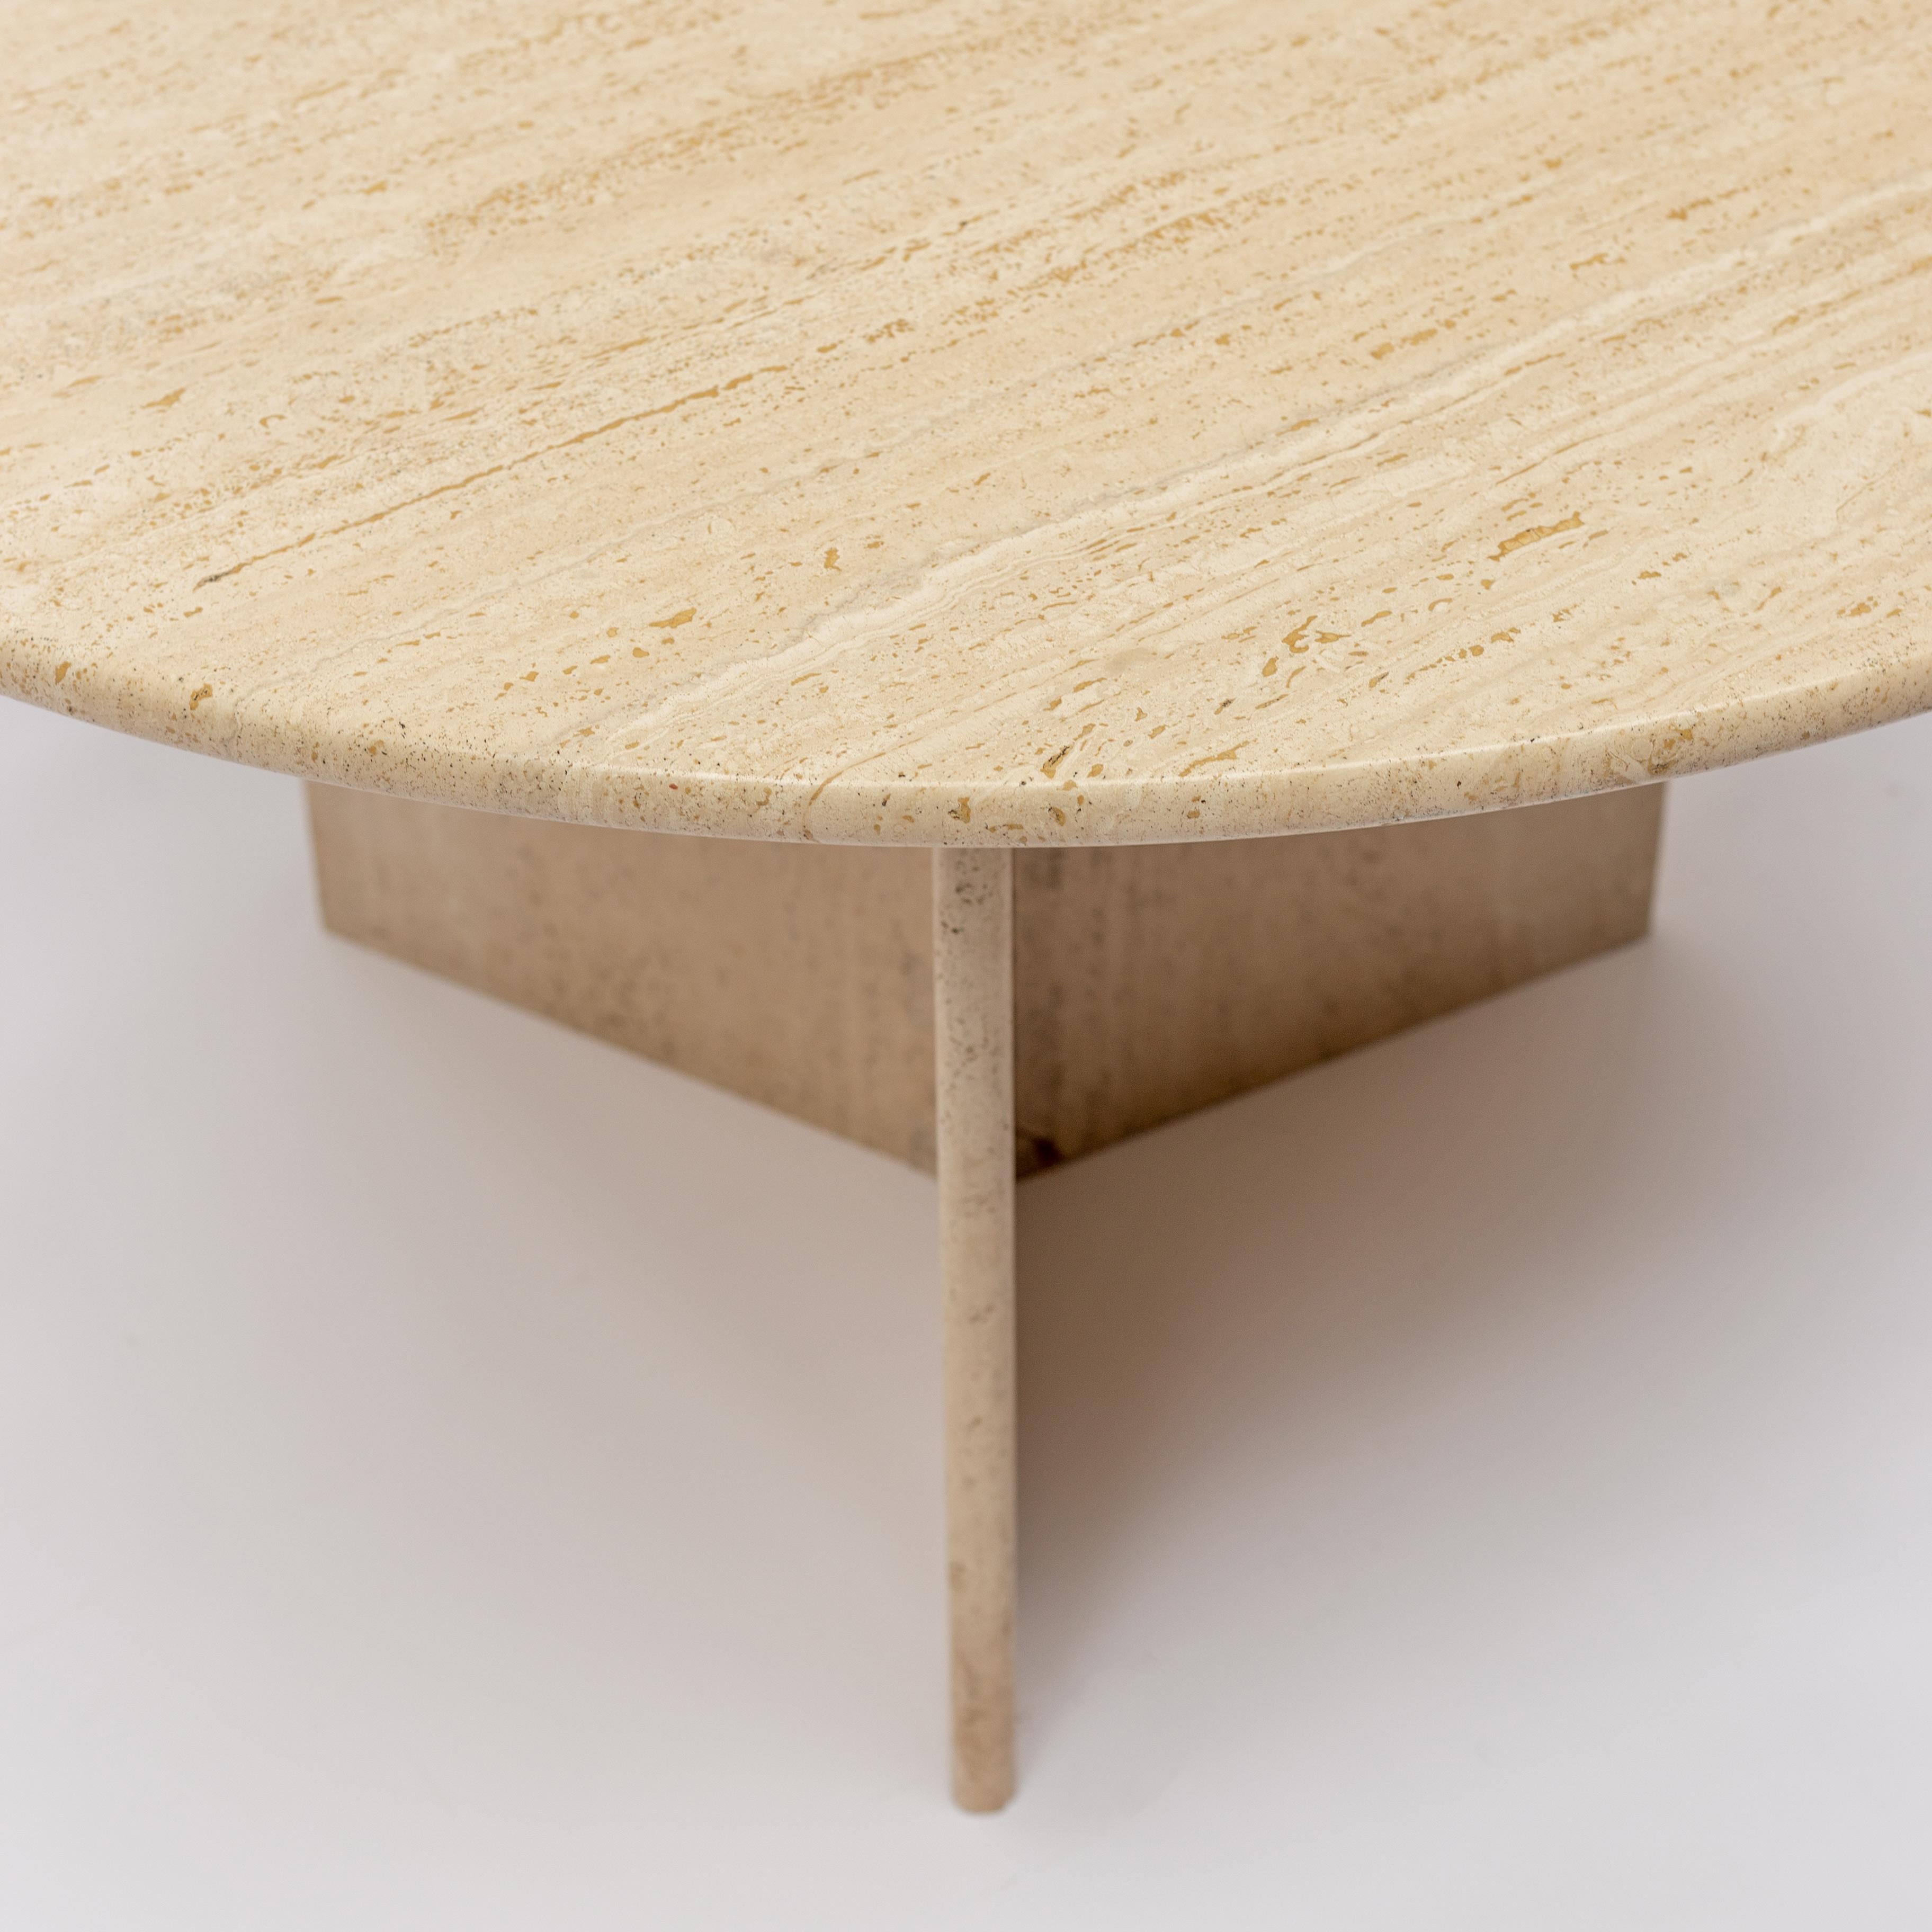 Round travertine dining table in good vintage condition. The base is formed of three slabs of travertine, which combine into a triangle or star shape. Measures: 130 cm x 72 cm.